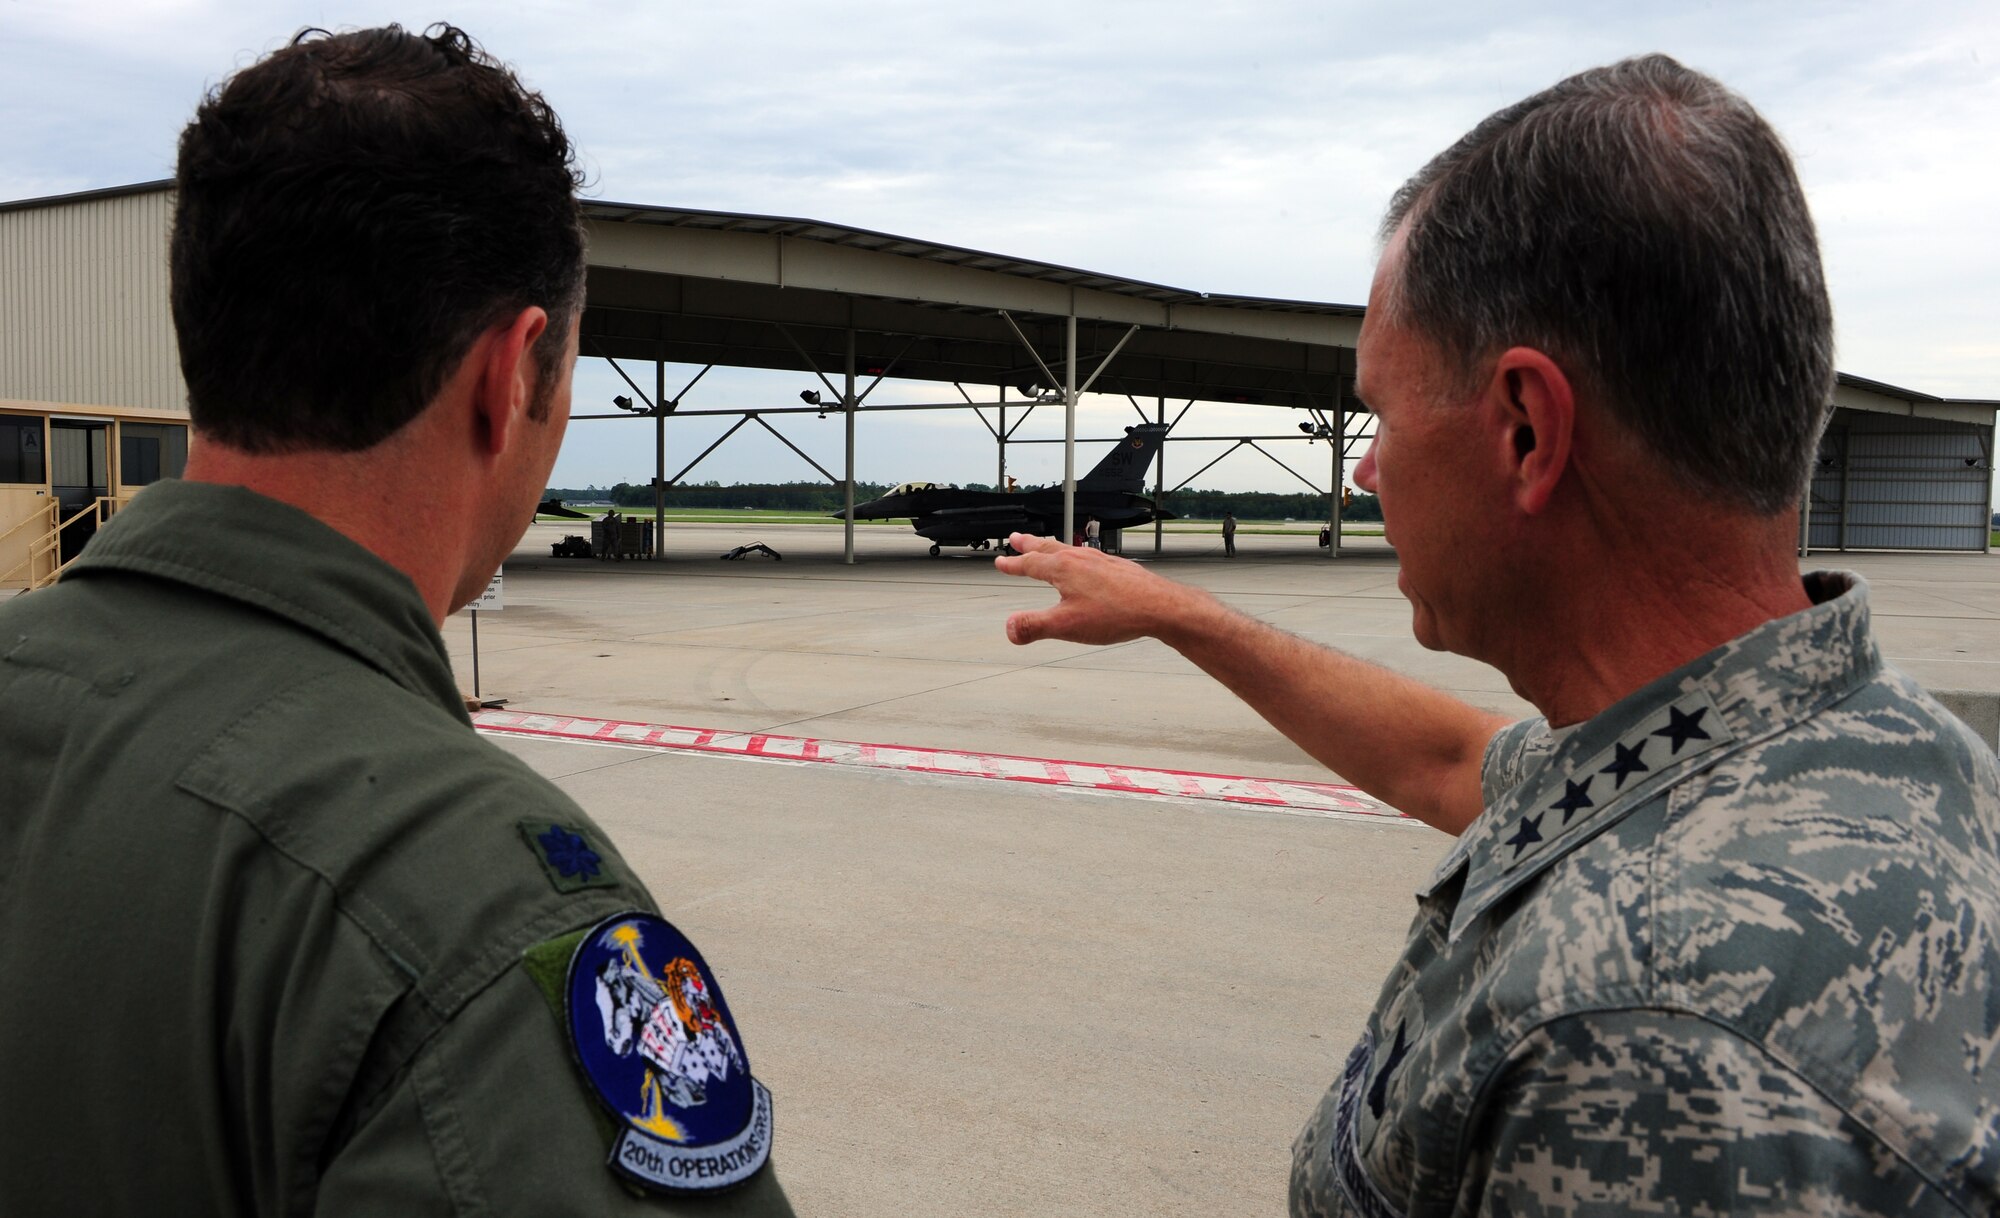 100616-F-6838W-034
SHAW AIR FORCE BASE, S.C.--Gen. William M. Fraser, Air Combat commander (right) and Lt. Col. Mitch Miglori, 20th Operations group F-16 fighter pilot, overlooks an alert exercise of the F-16 fighter jets June 16, 2010. General Fraser and his wife visited Shaw to gain insight into the mission and speak with Airmen from units across the base to hear their concerns.  (U.S. Air Force photo/Airman 1st Class Neil D. Warner)
